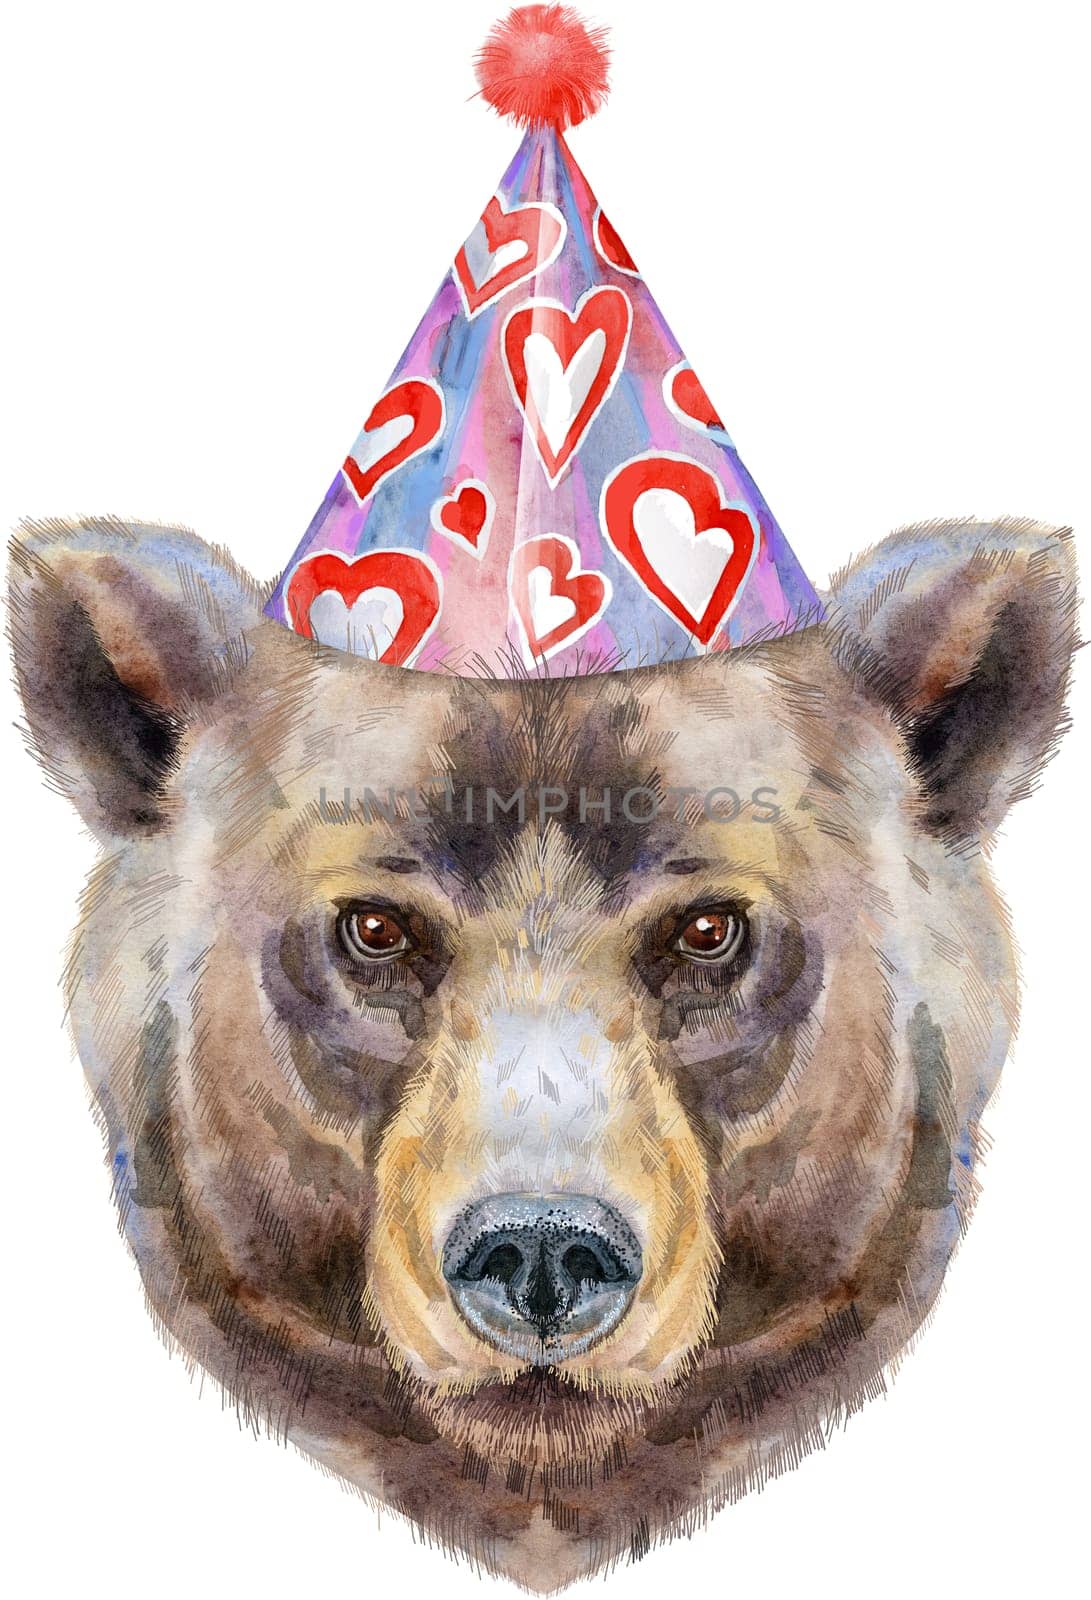 Bear portrait party hat. Watercolor brown bear painting illustration. Beautiful wildlife world